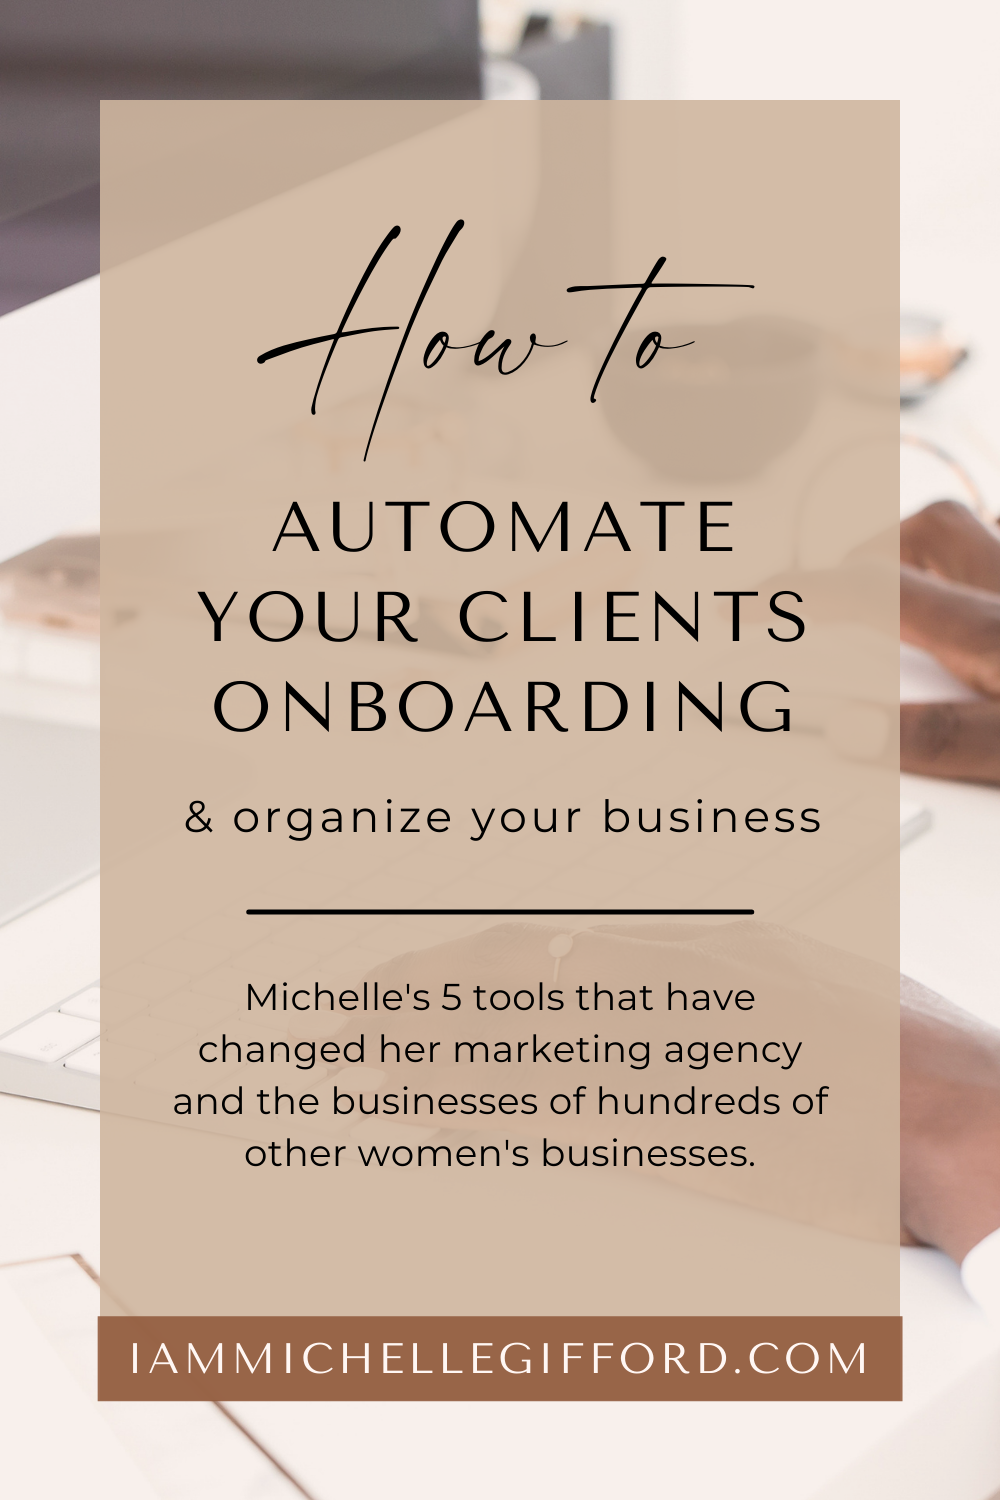 How to automate your clients onboarding process and organize your business iammichellegifford.com.